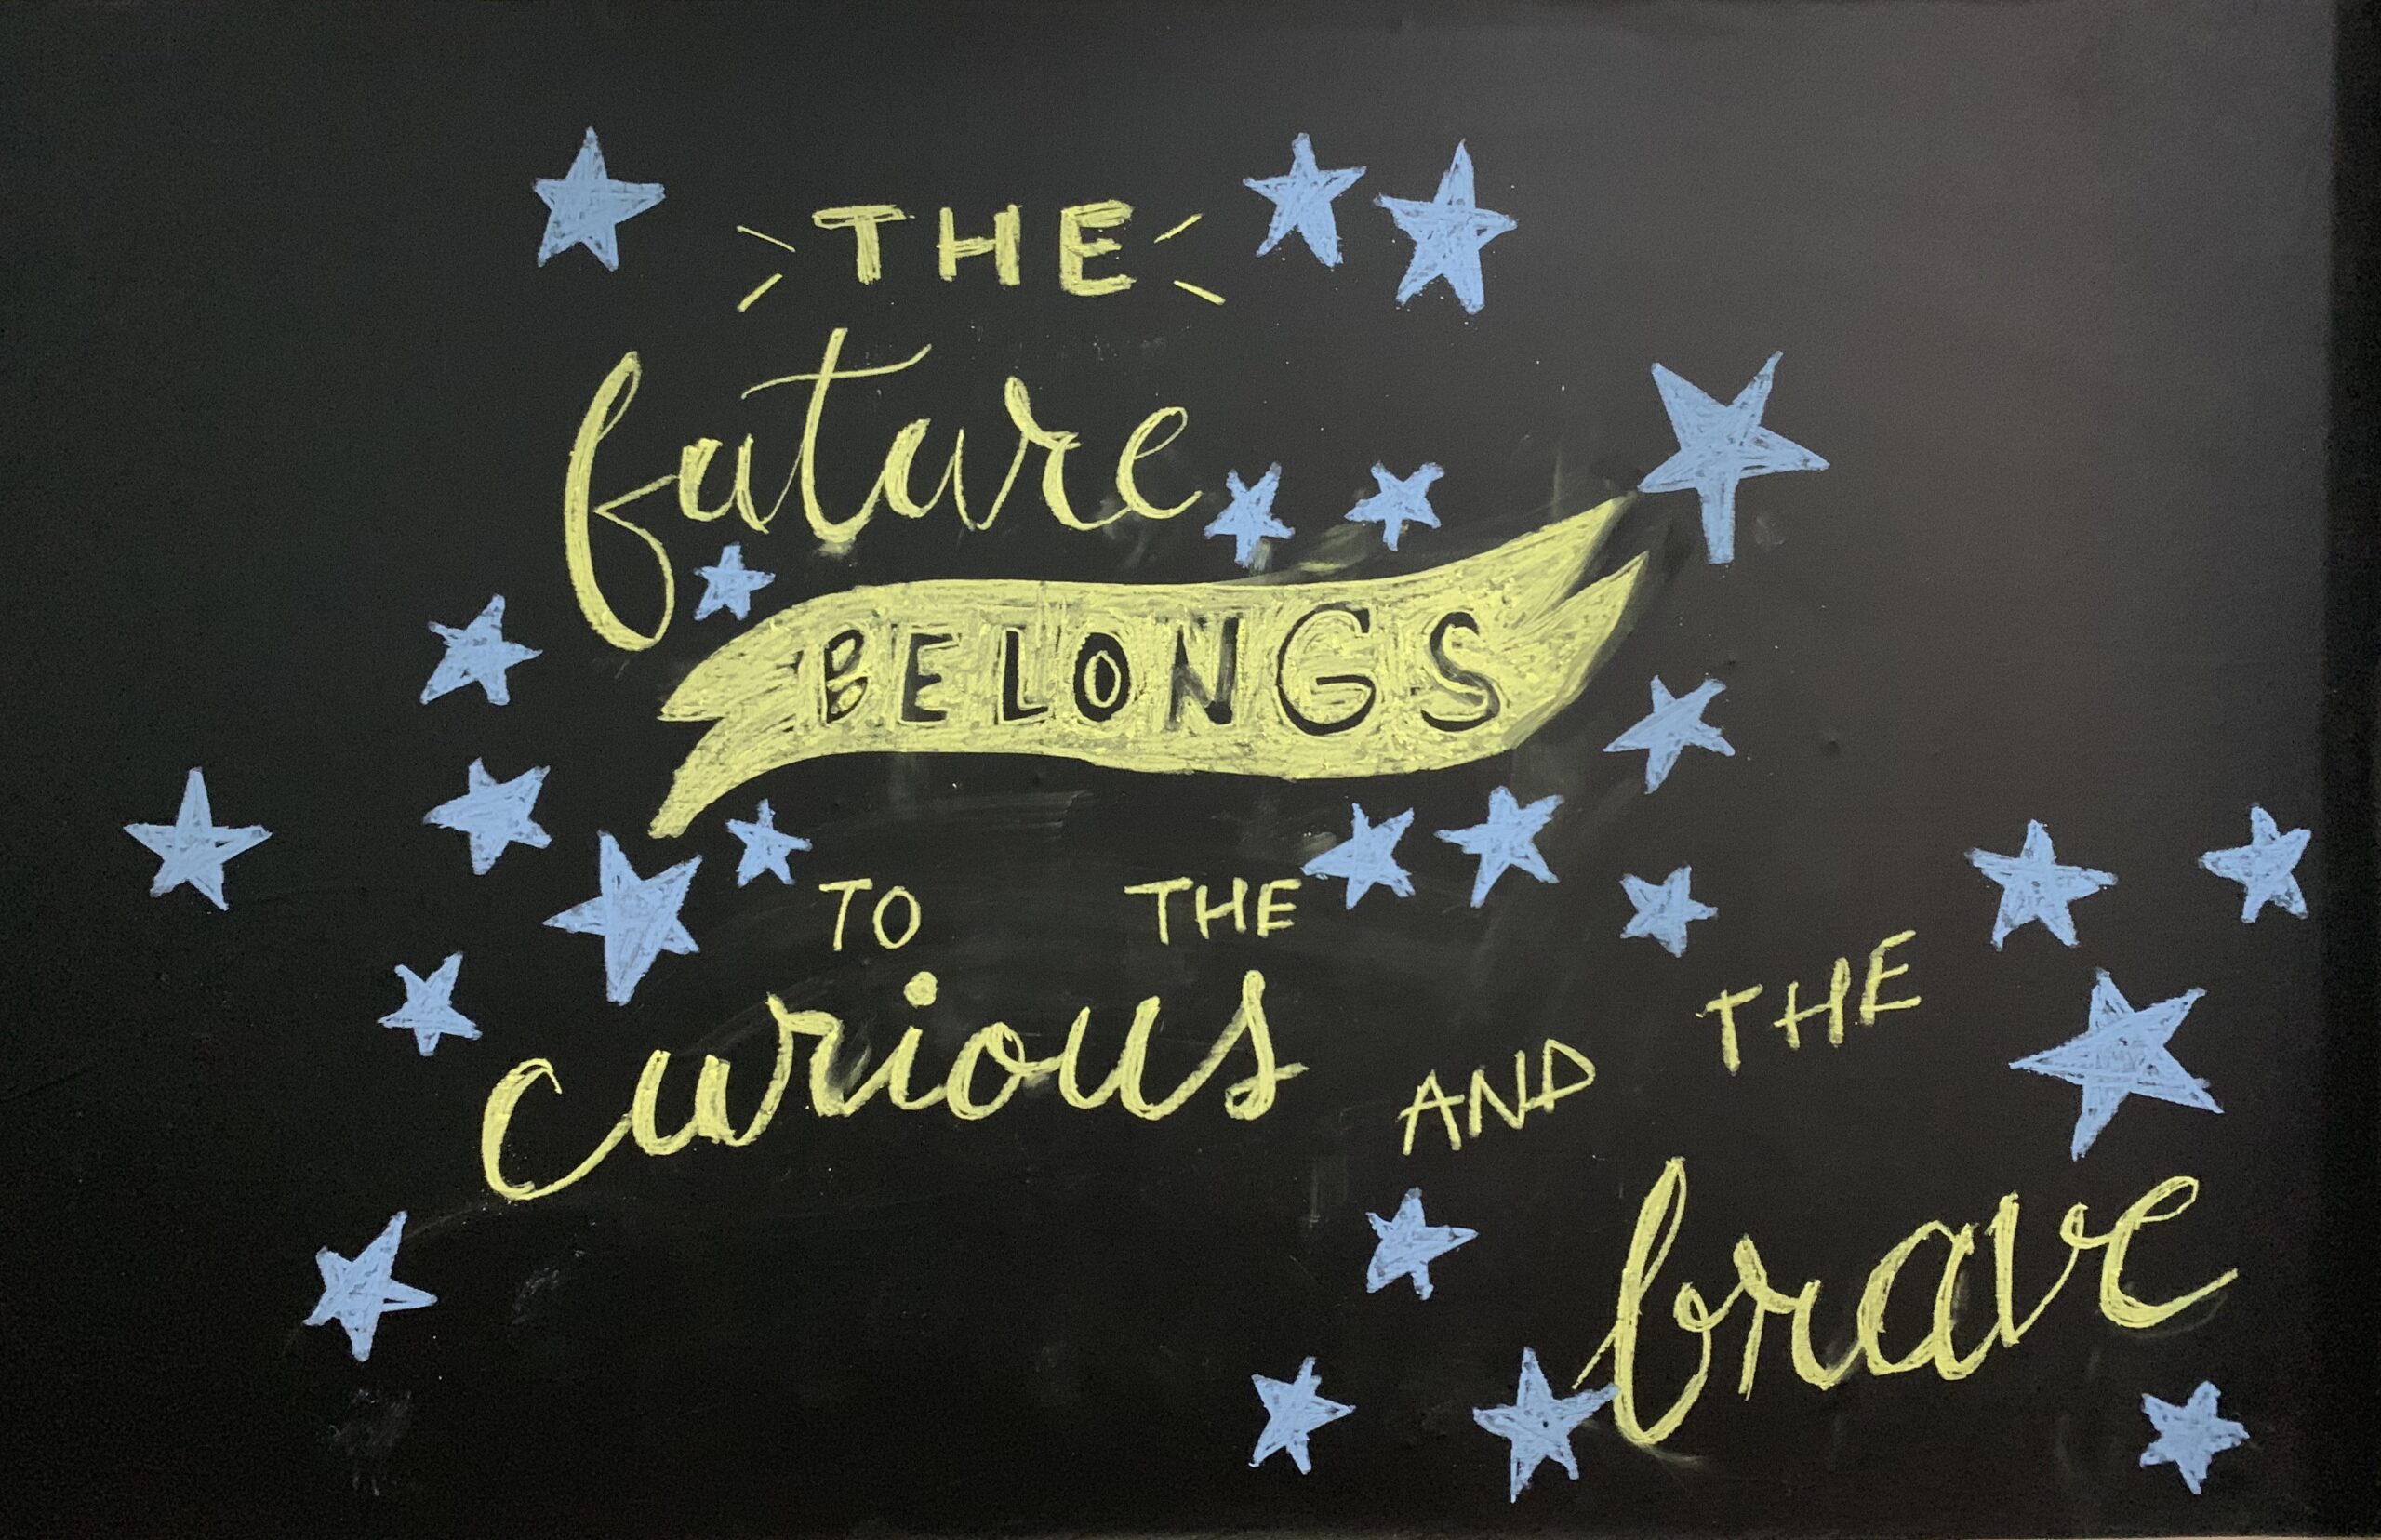 A quote illustrated on a blackboard